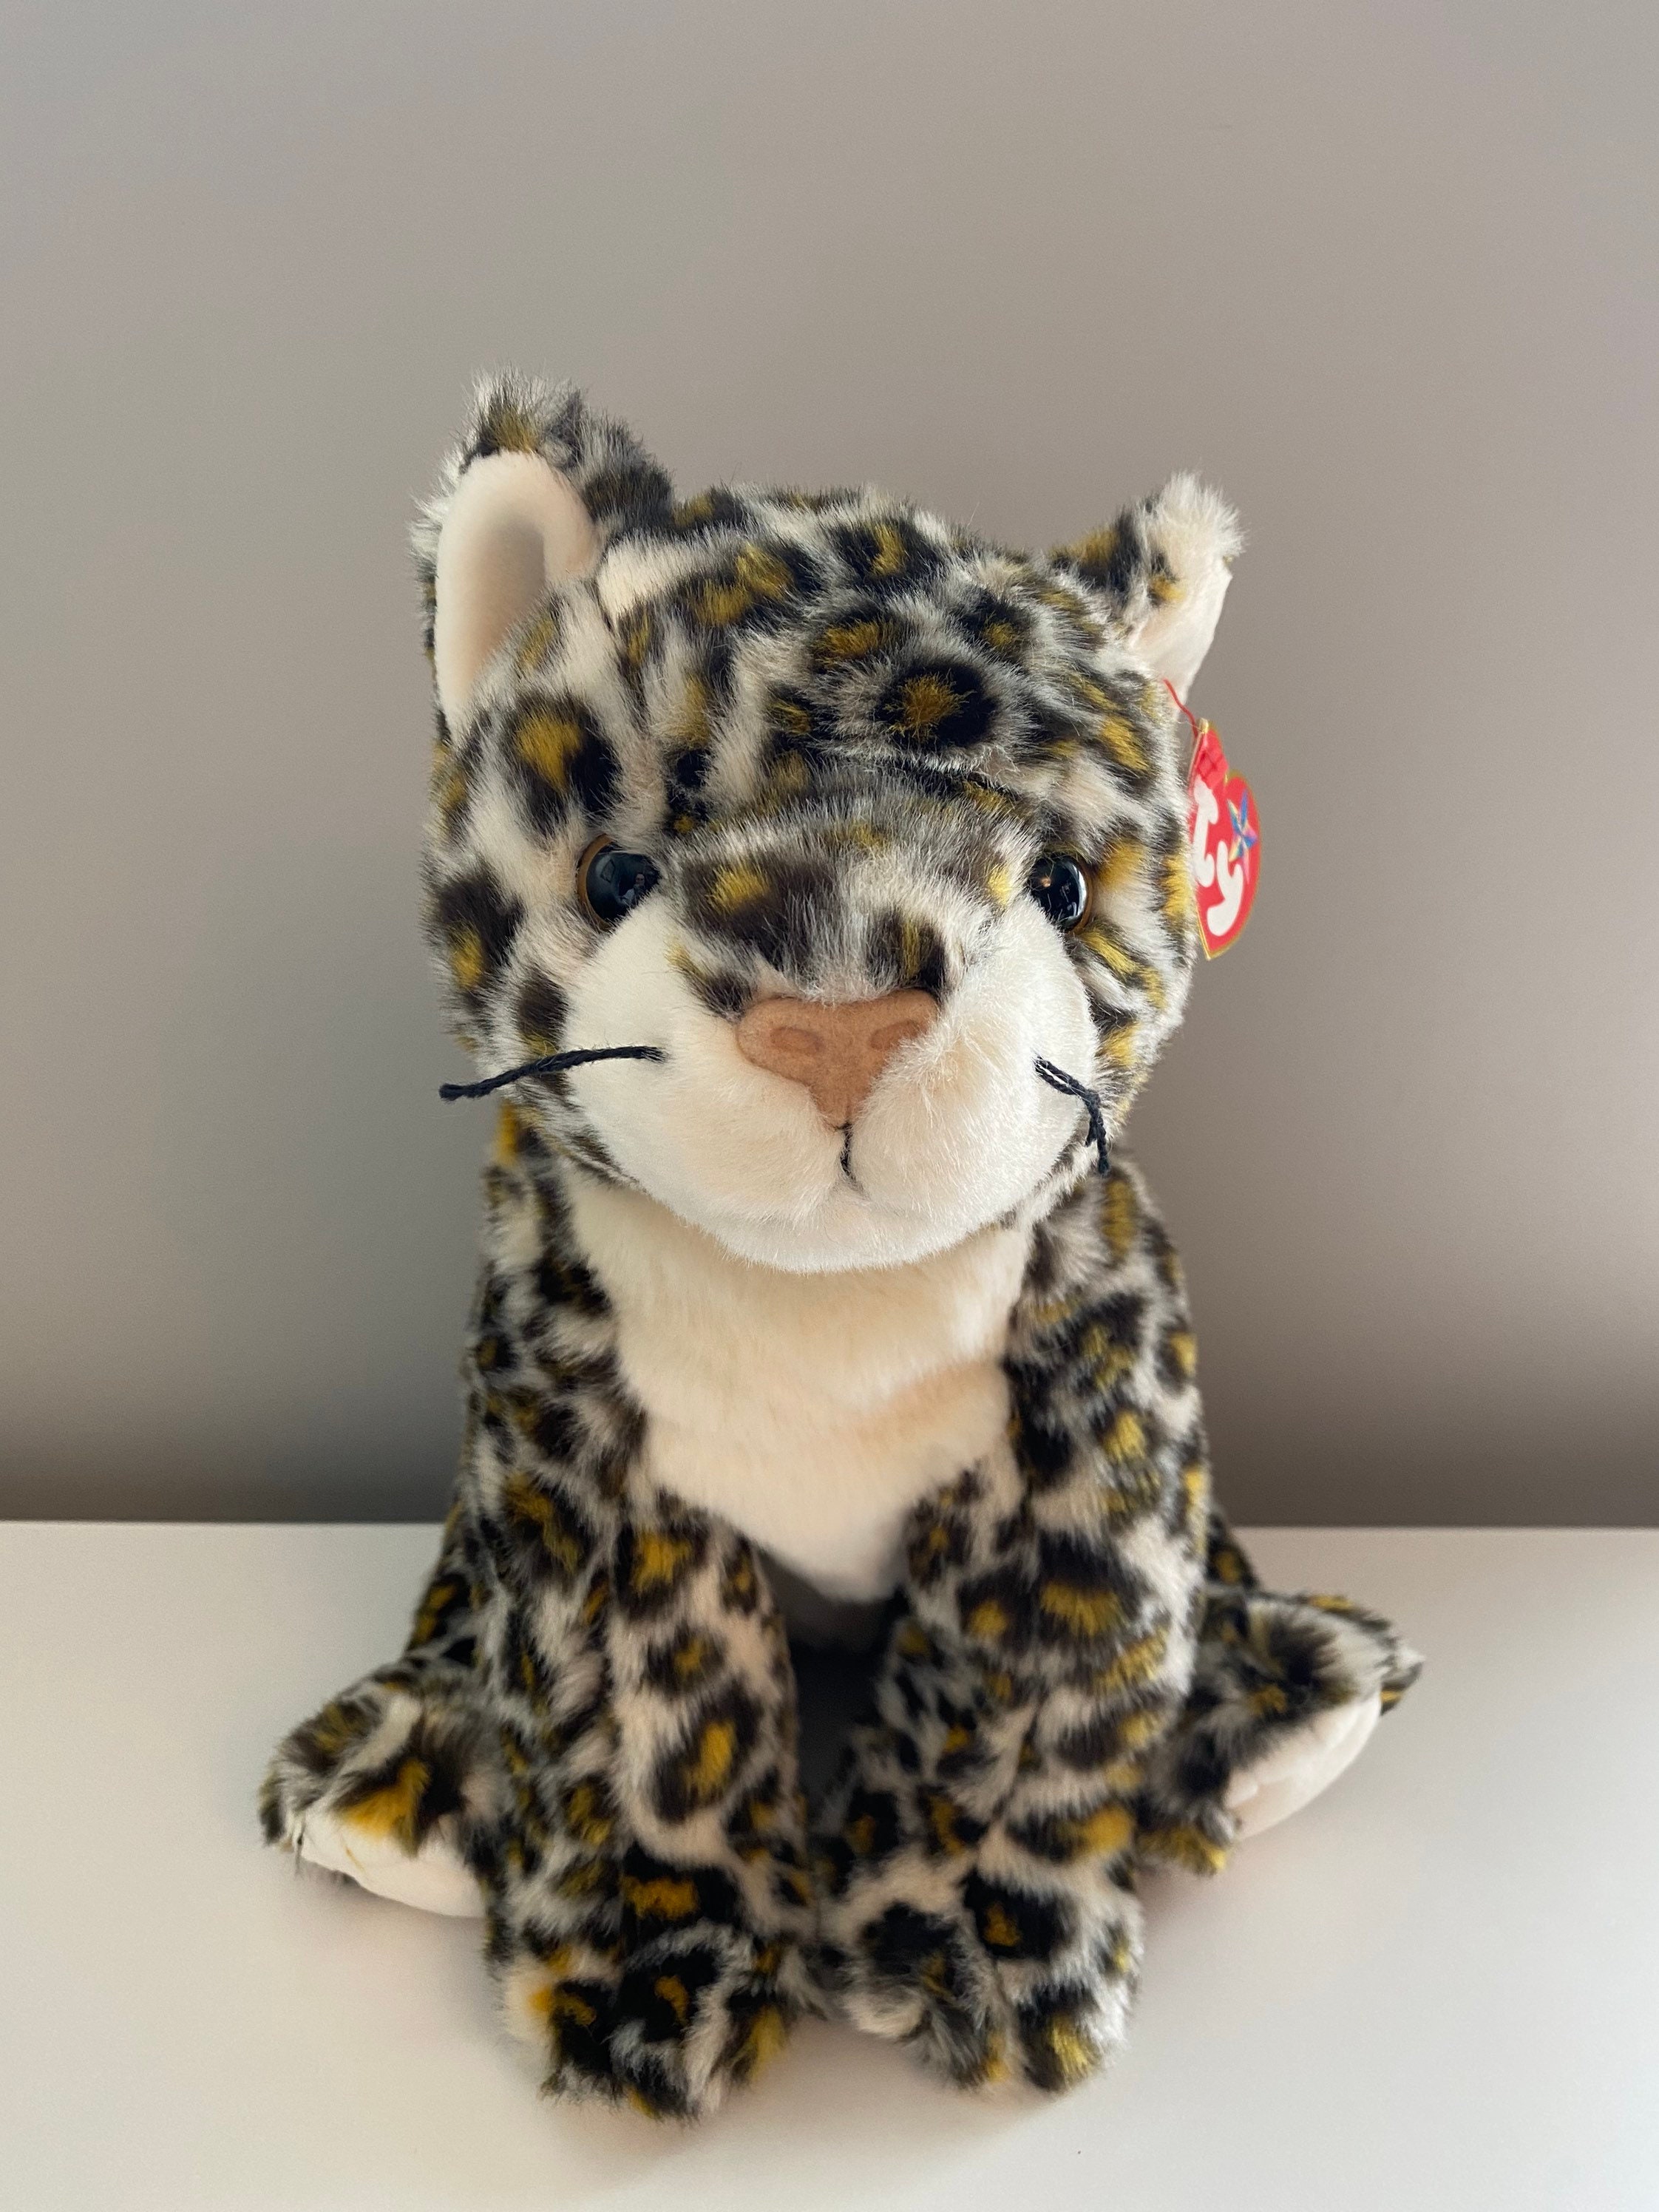 Peluche Beanies small - freckles le leopard Ty -TY42120